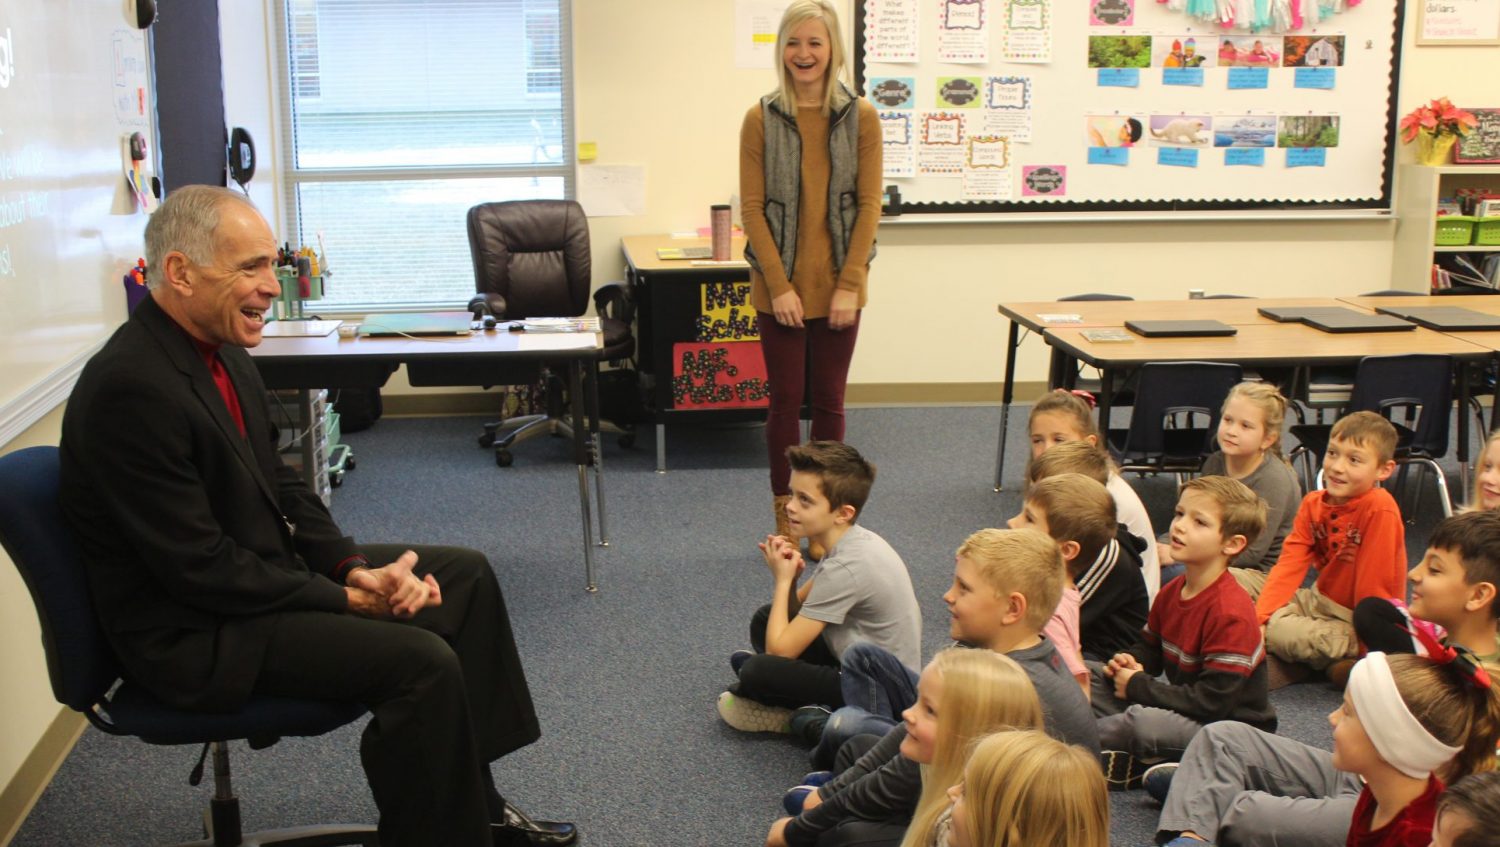 School visits bring awe of students and staff